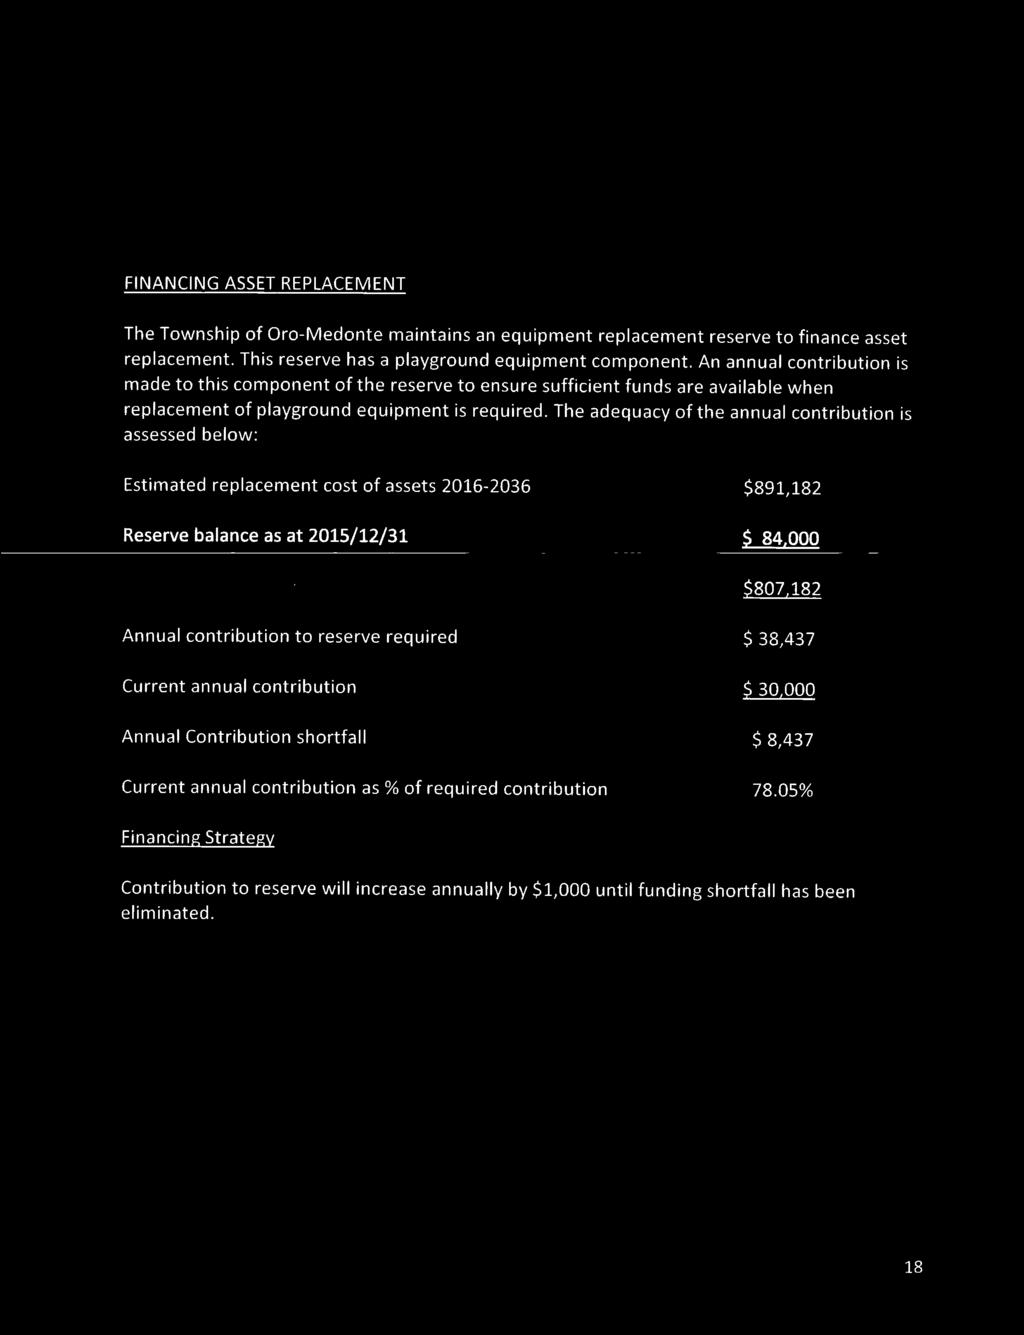 The adequacy of the annual contribution is assessed below: Estimated replacement cost of assets 2016-2036 $891,182 Reserve balance as at 2015/12/31 $ 84,000 $807,182 Annual contribution to reserve